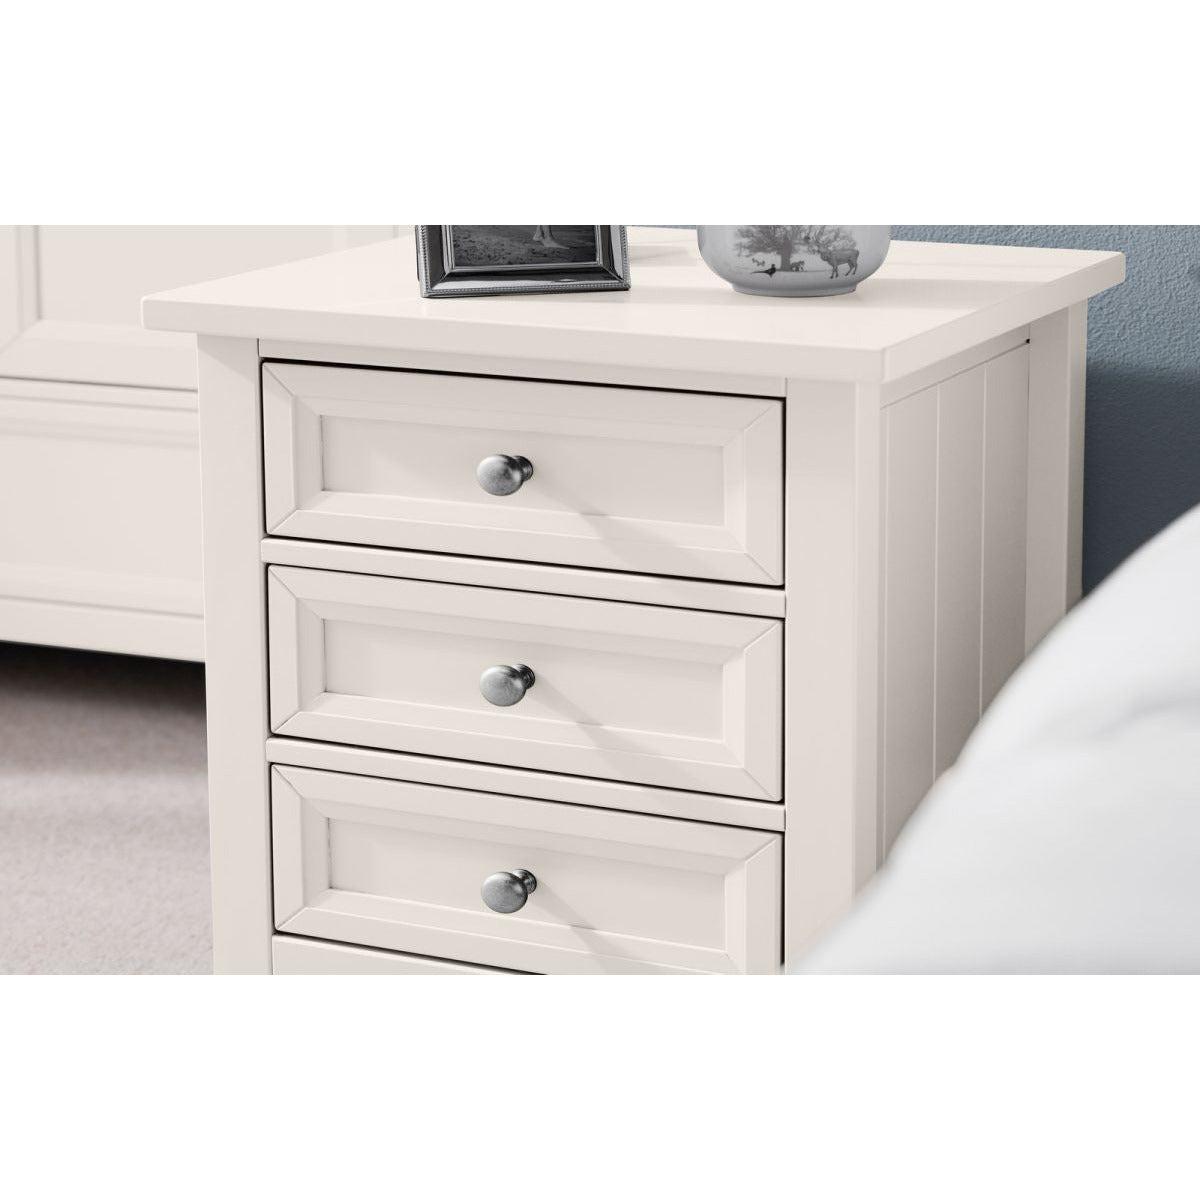 MAINE 3 DRAWER BEDSIDE - white